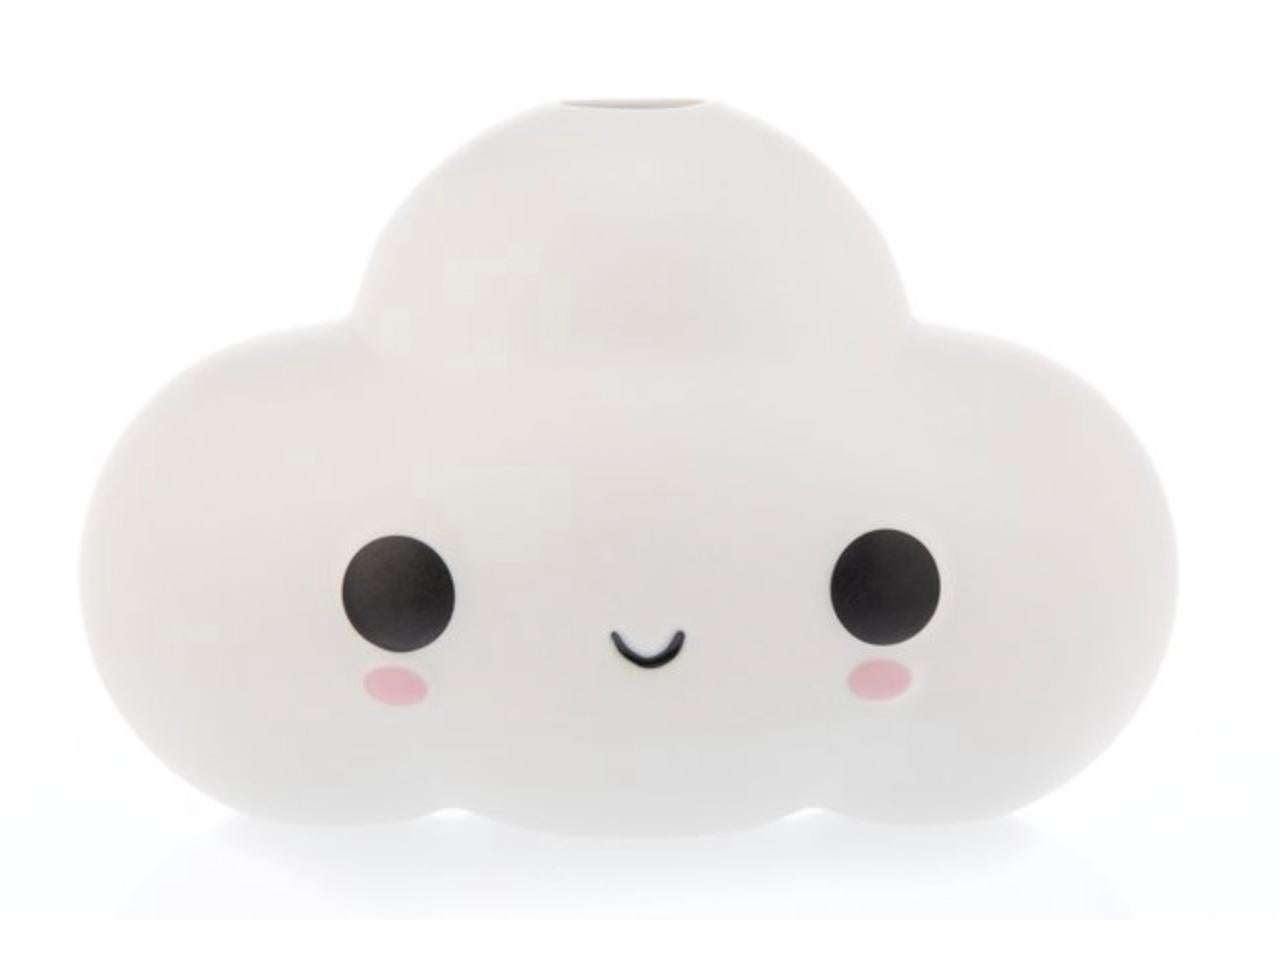 Little Cloud - Sculpture by Friends with You